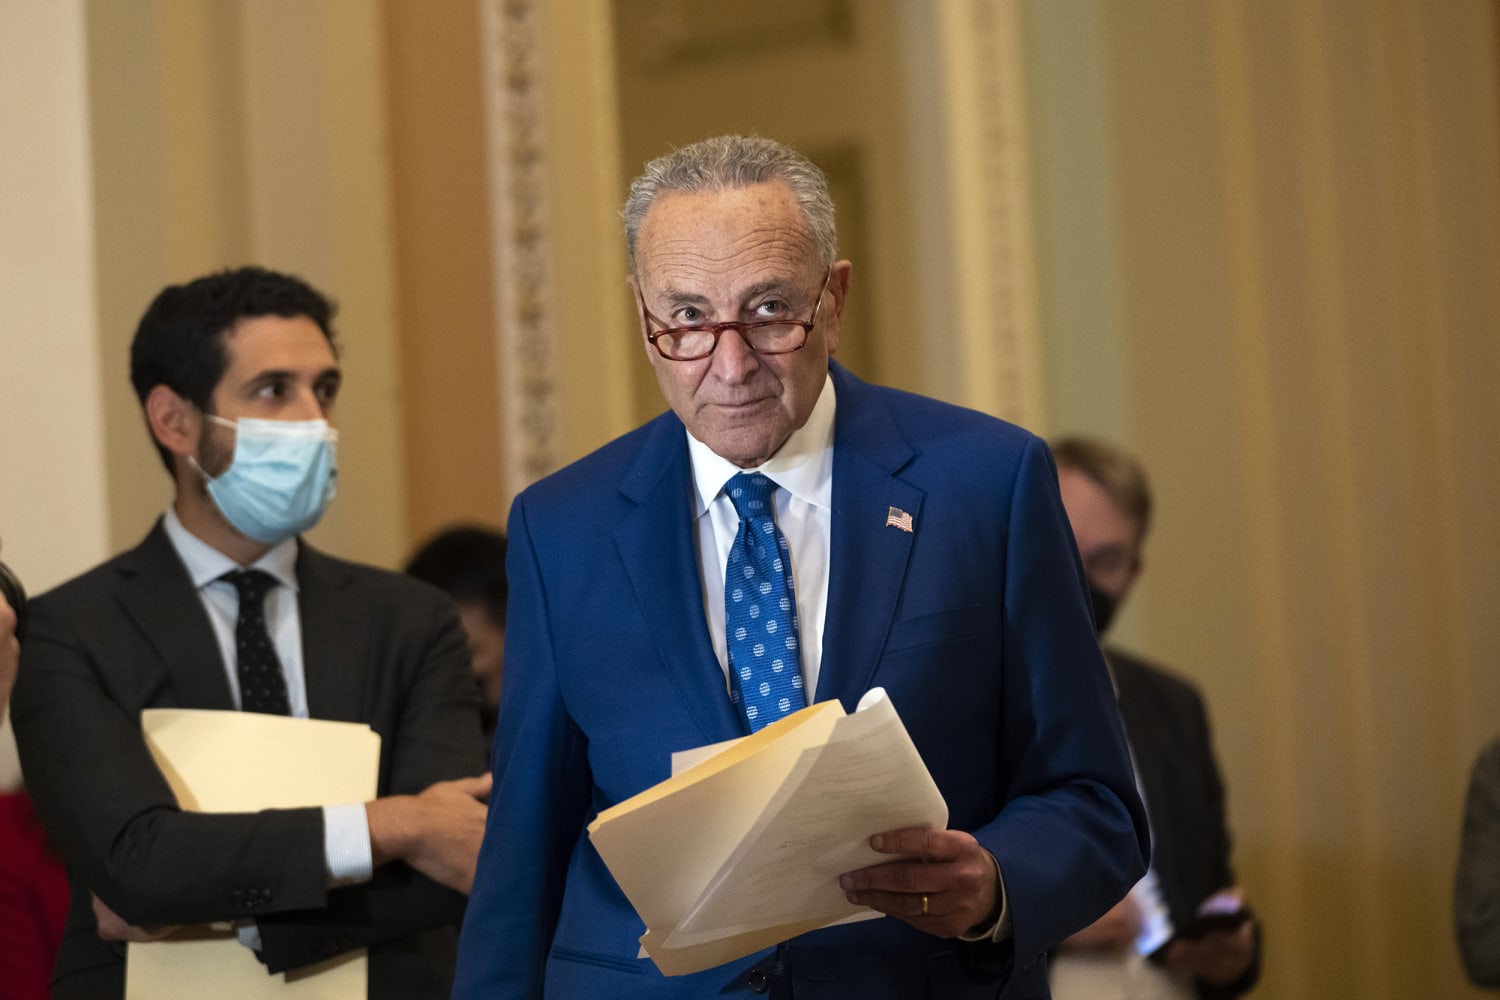 Democrats rebrand massive safety net bill in face of inflation attacks